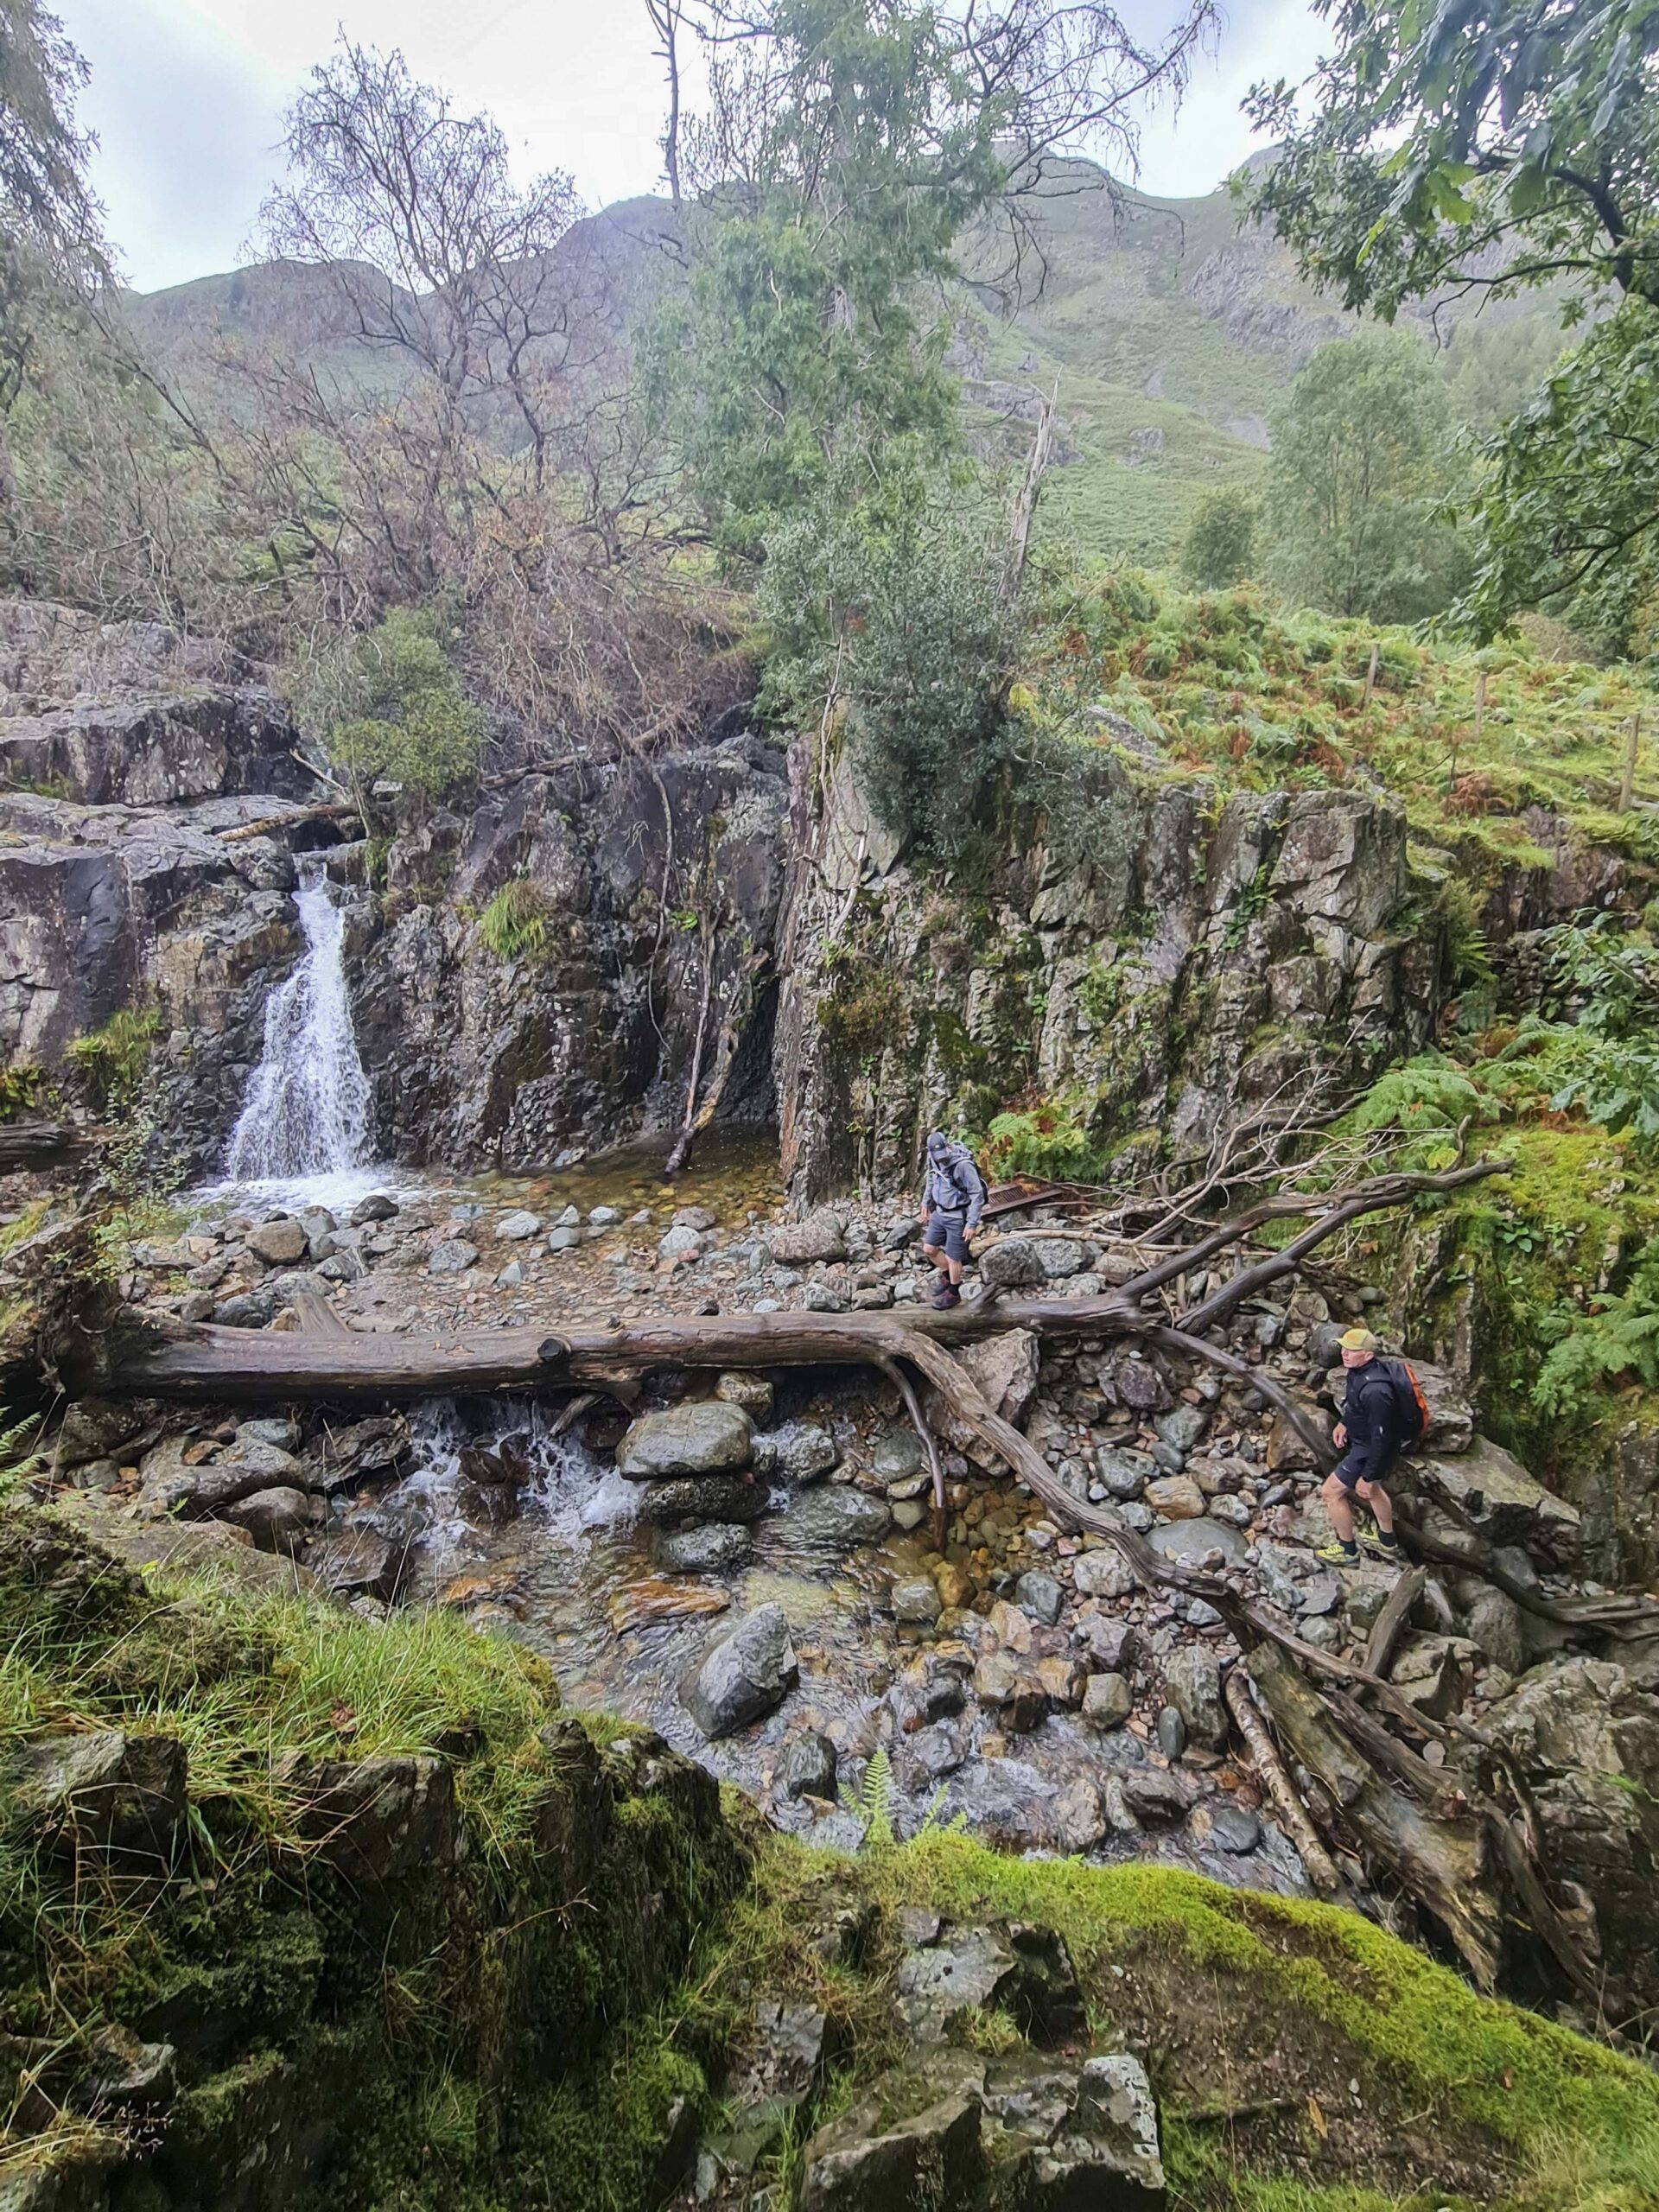 Climbing up the ghyll